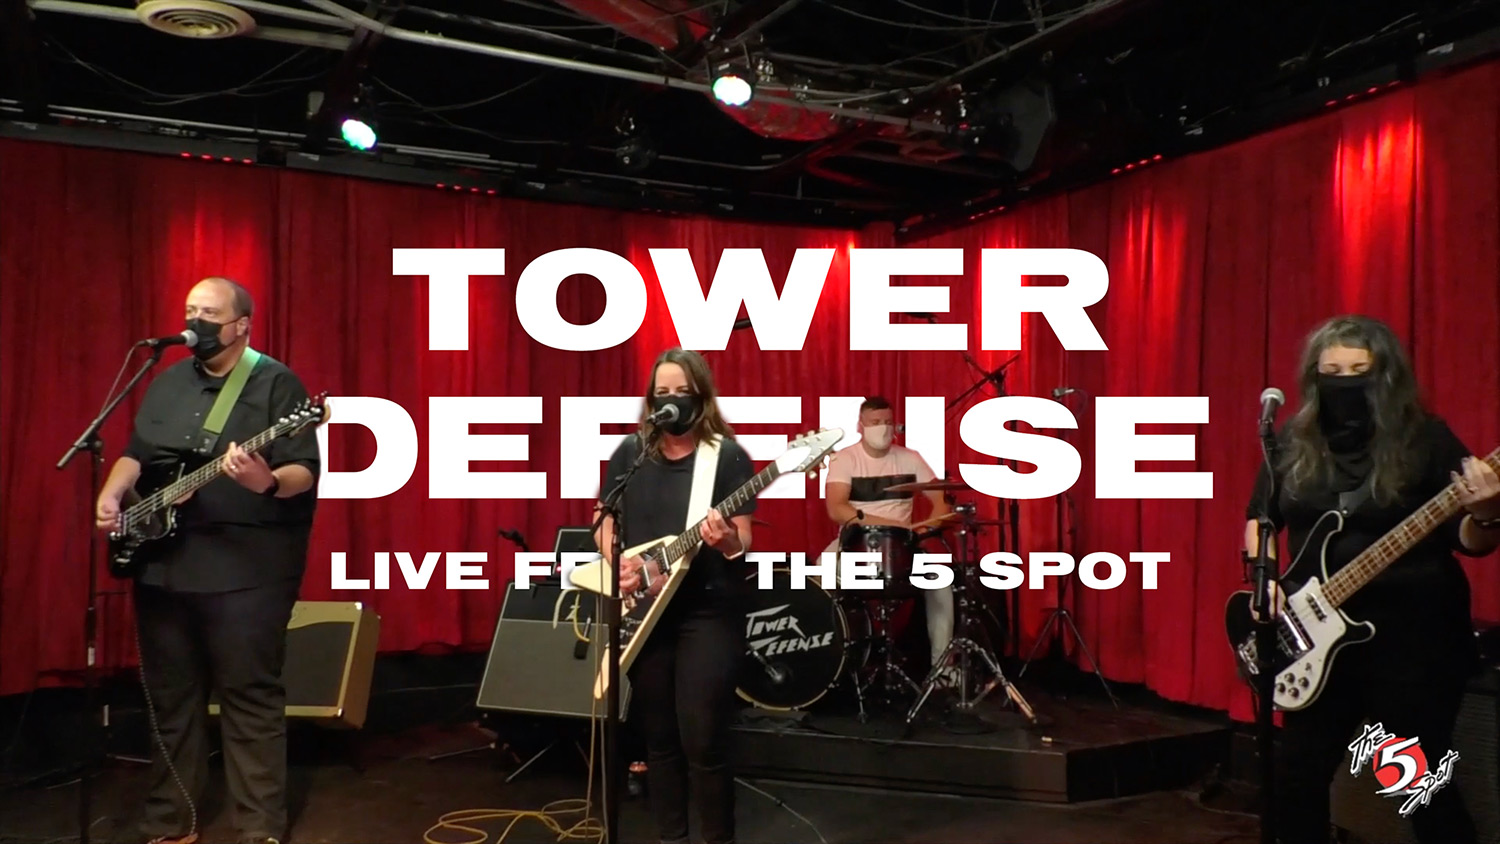 Tower Defense -- Live from The 5 Spot